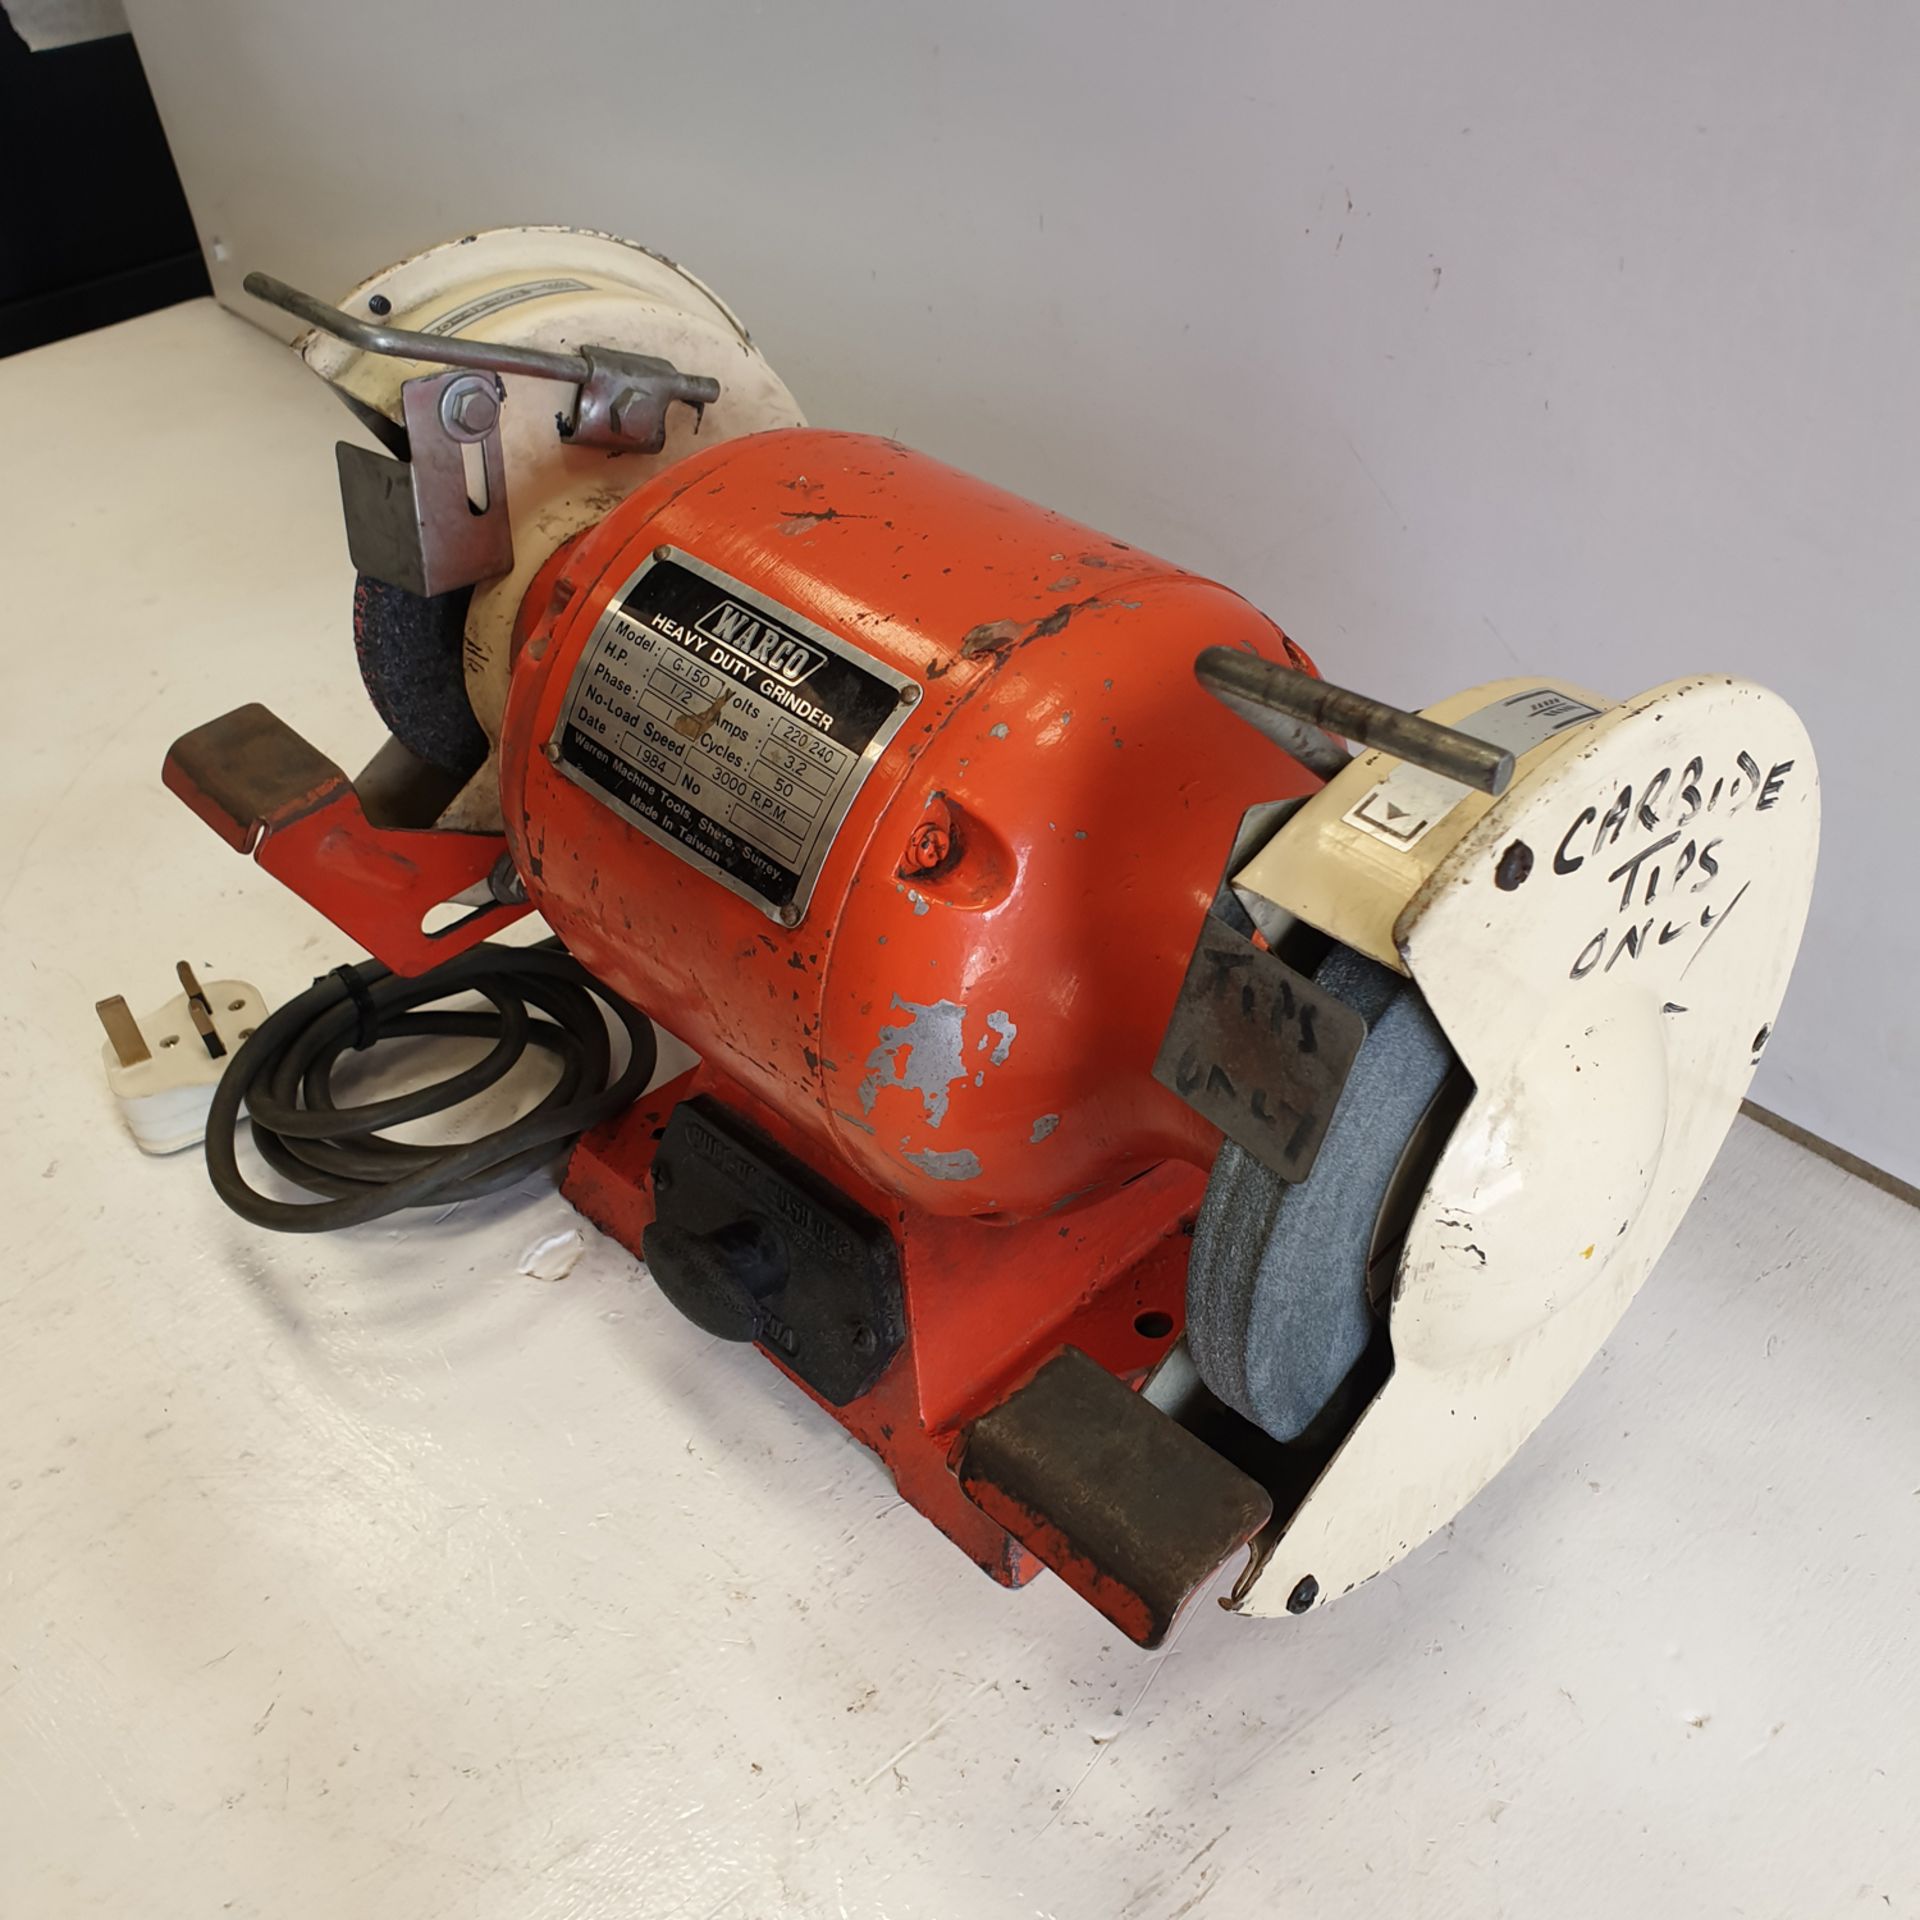 Warco Model G-150. Heavy Duty Bench Grinder. 1/2HP. - Image 2 of 4